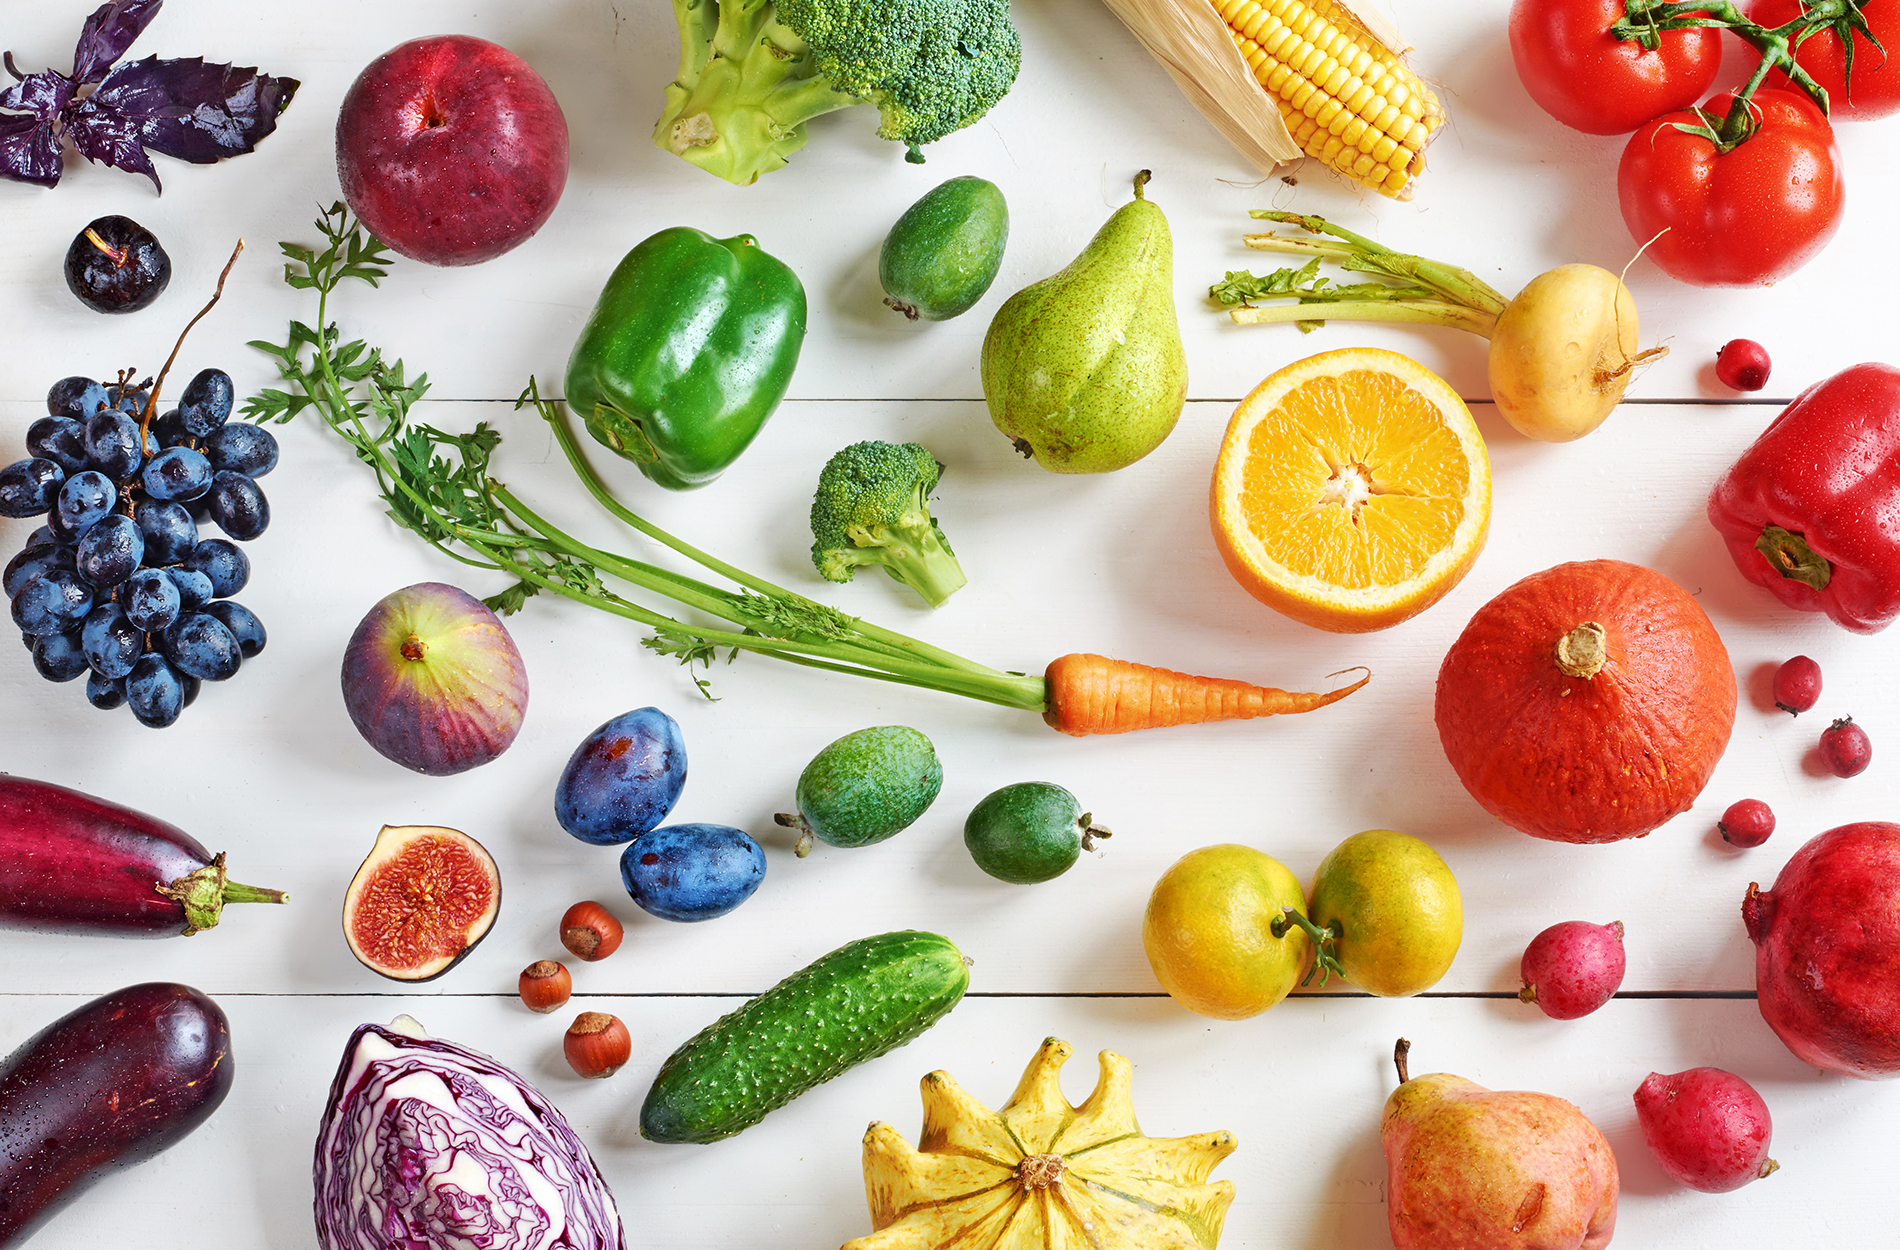 Array of colorful fruits and vegetables